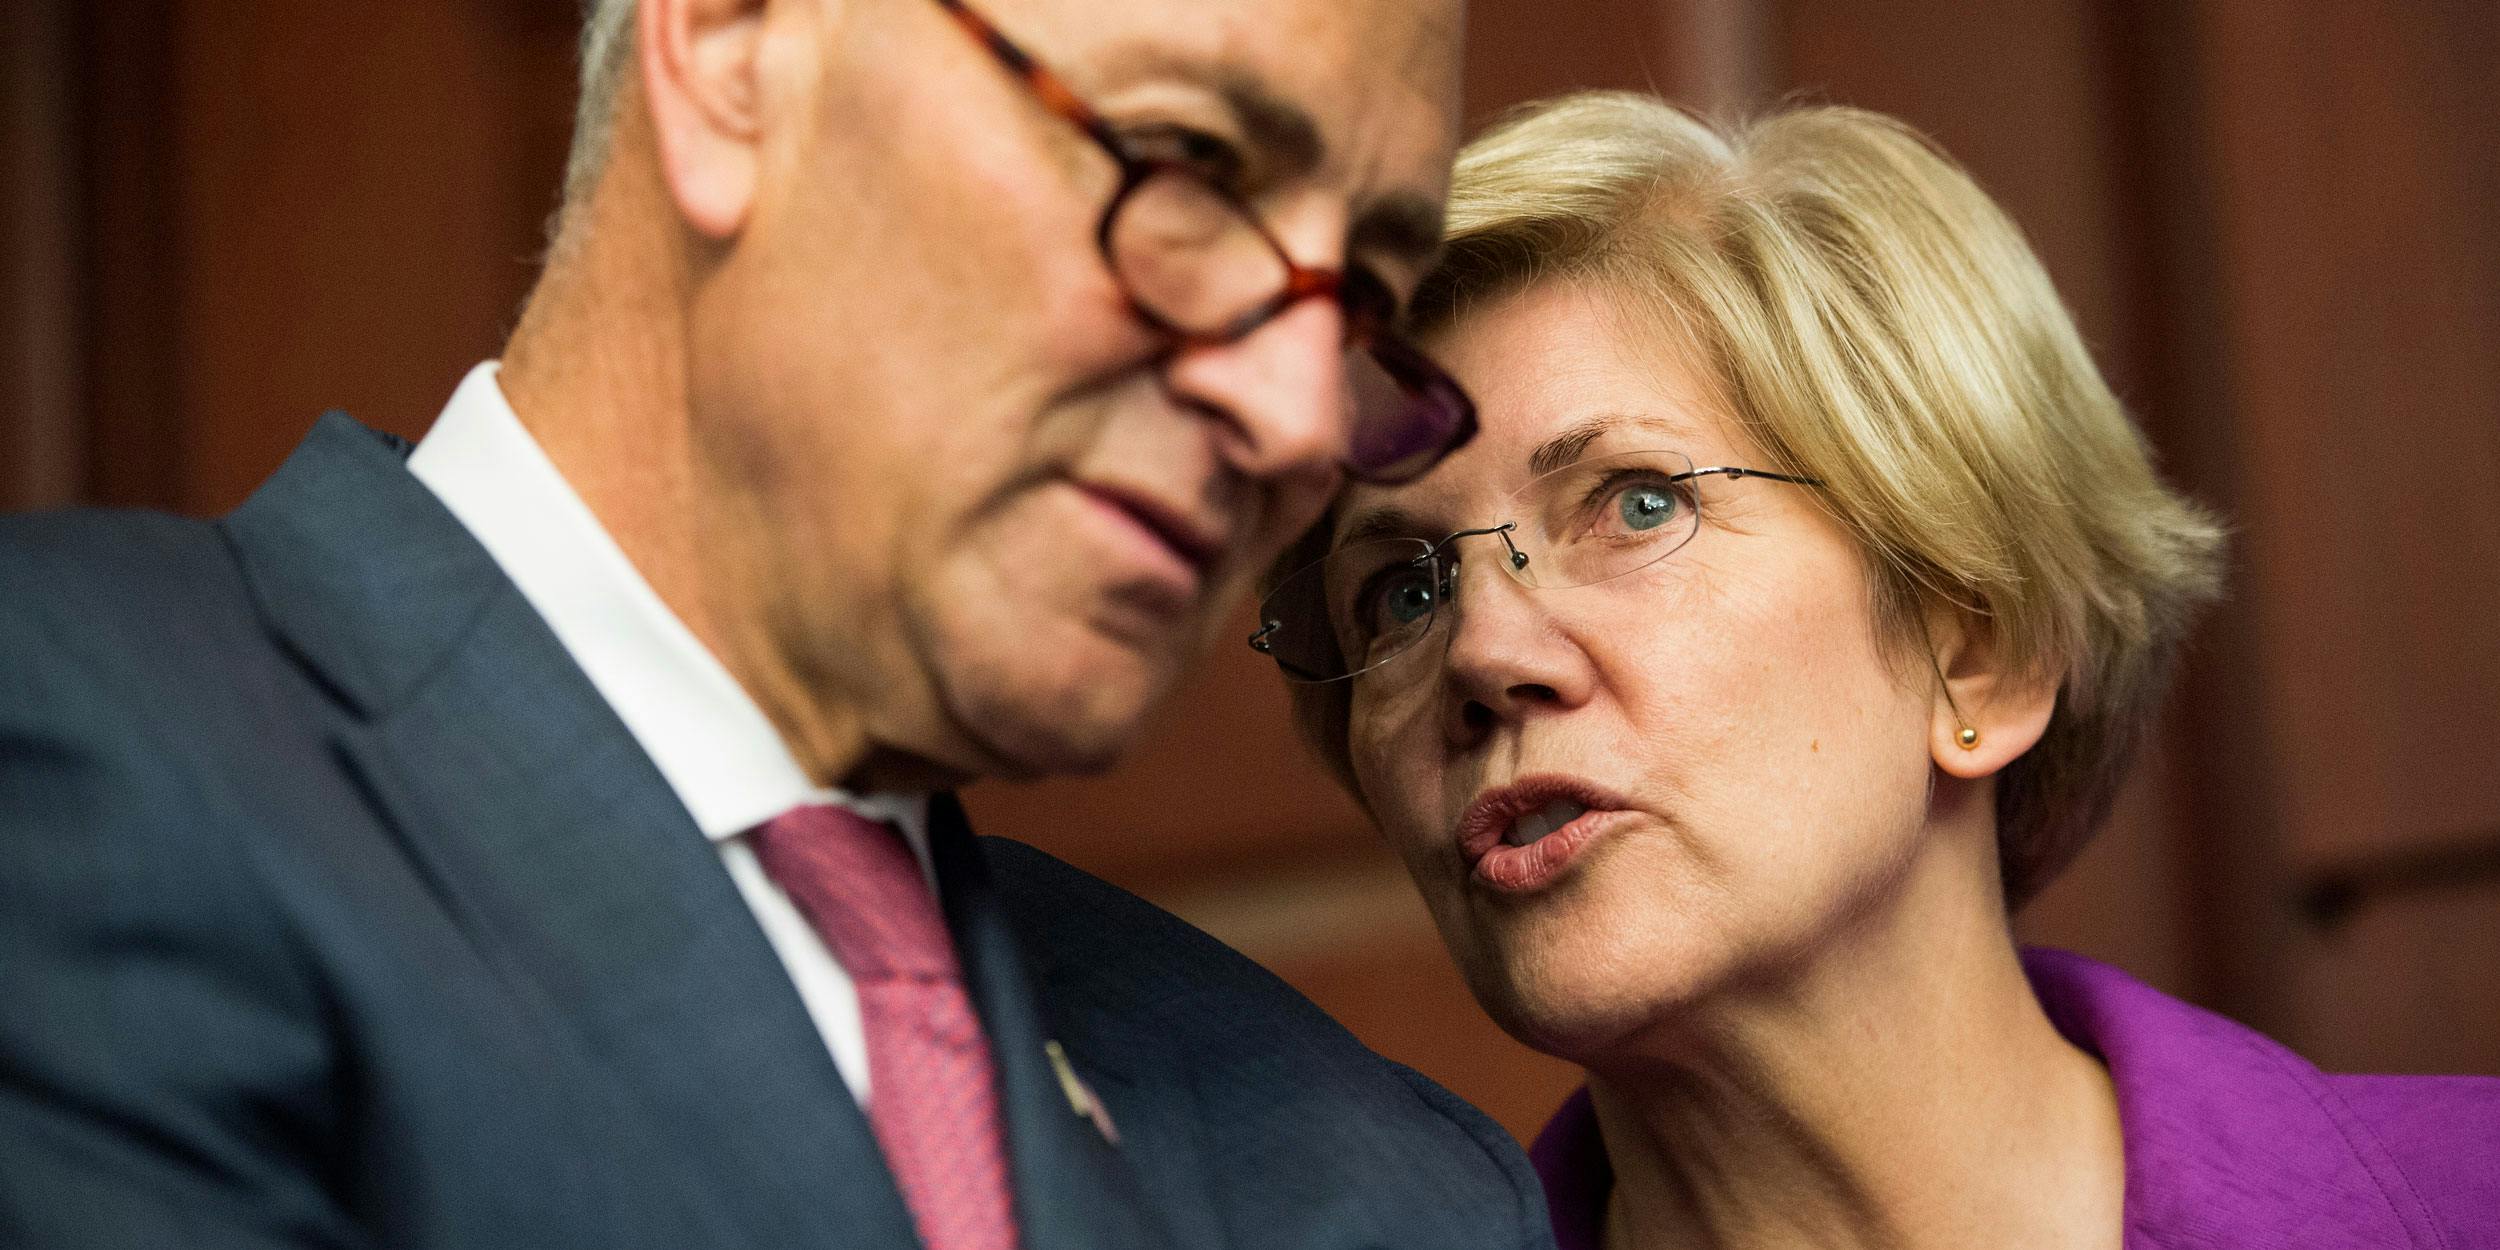 From left, Sen. Chuck Schumer, D-N.Y., and Sen. Elizabeth Warren, D-Mass., talk during the Senate Democrats' news conference on Tuesday, July 21, 2015. They've both been crucial to the marijuana legalization movement.